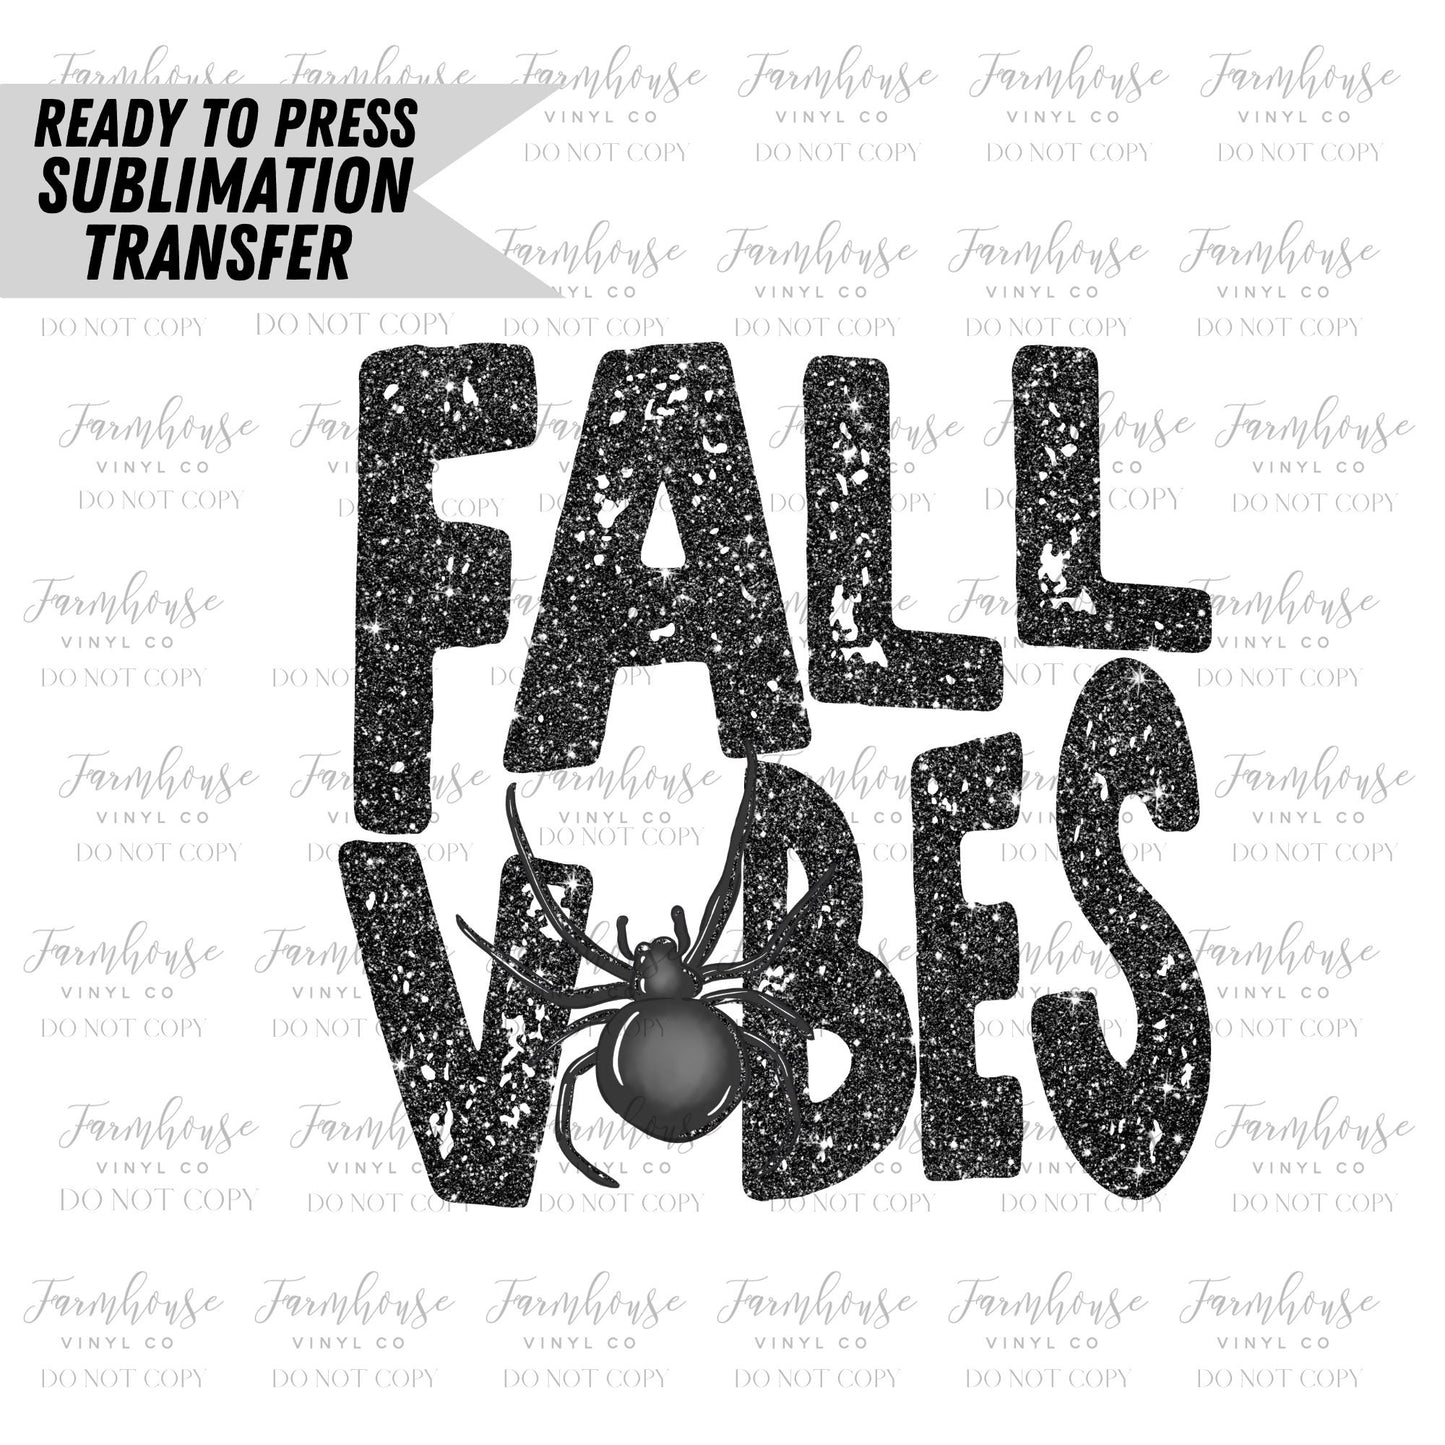 Distressed Fall Vibes Retro, Ready to Press Sublimation Transfers, Sublimation design, Halloween Design, Spider Black Glitter Fall Vibes